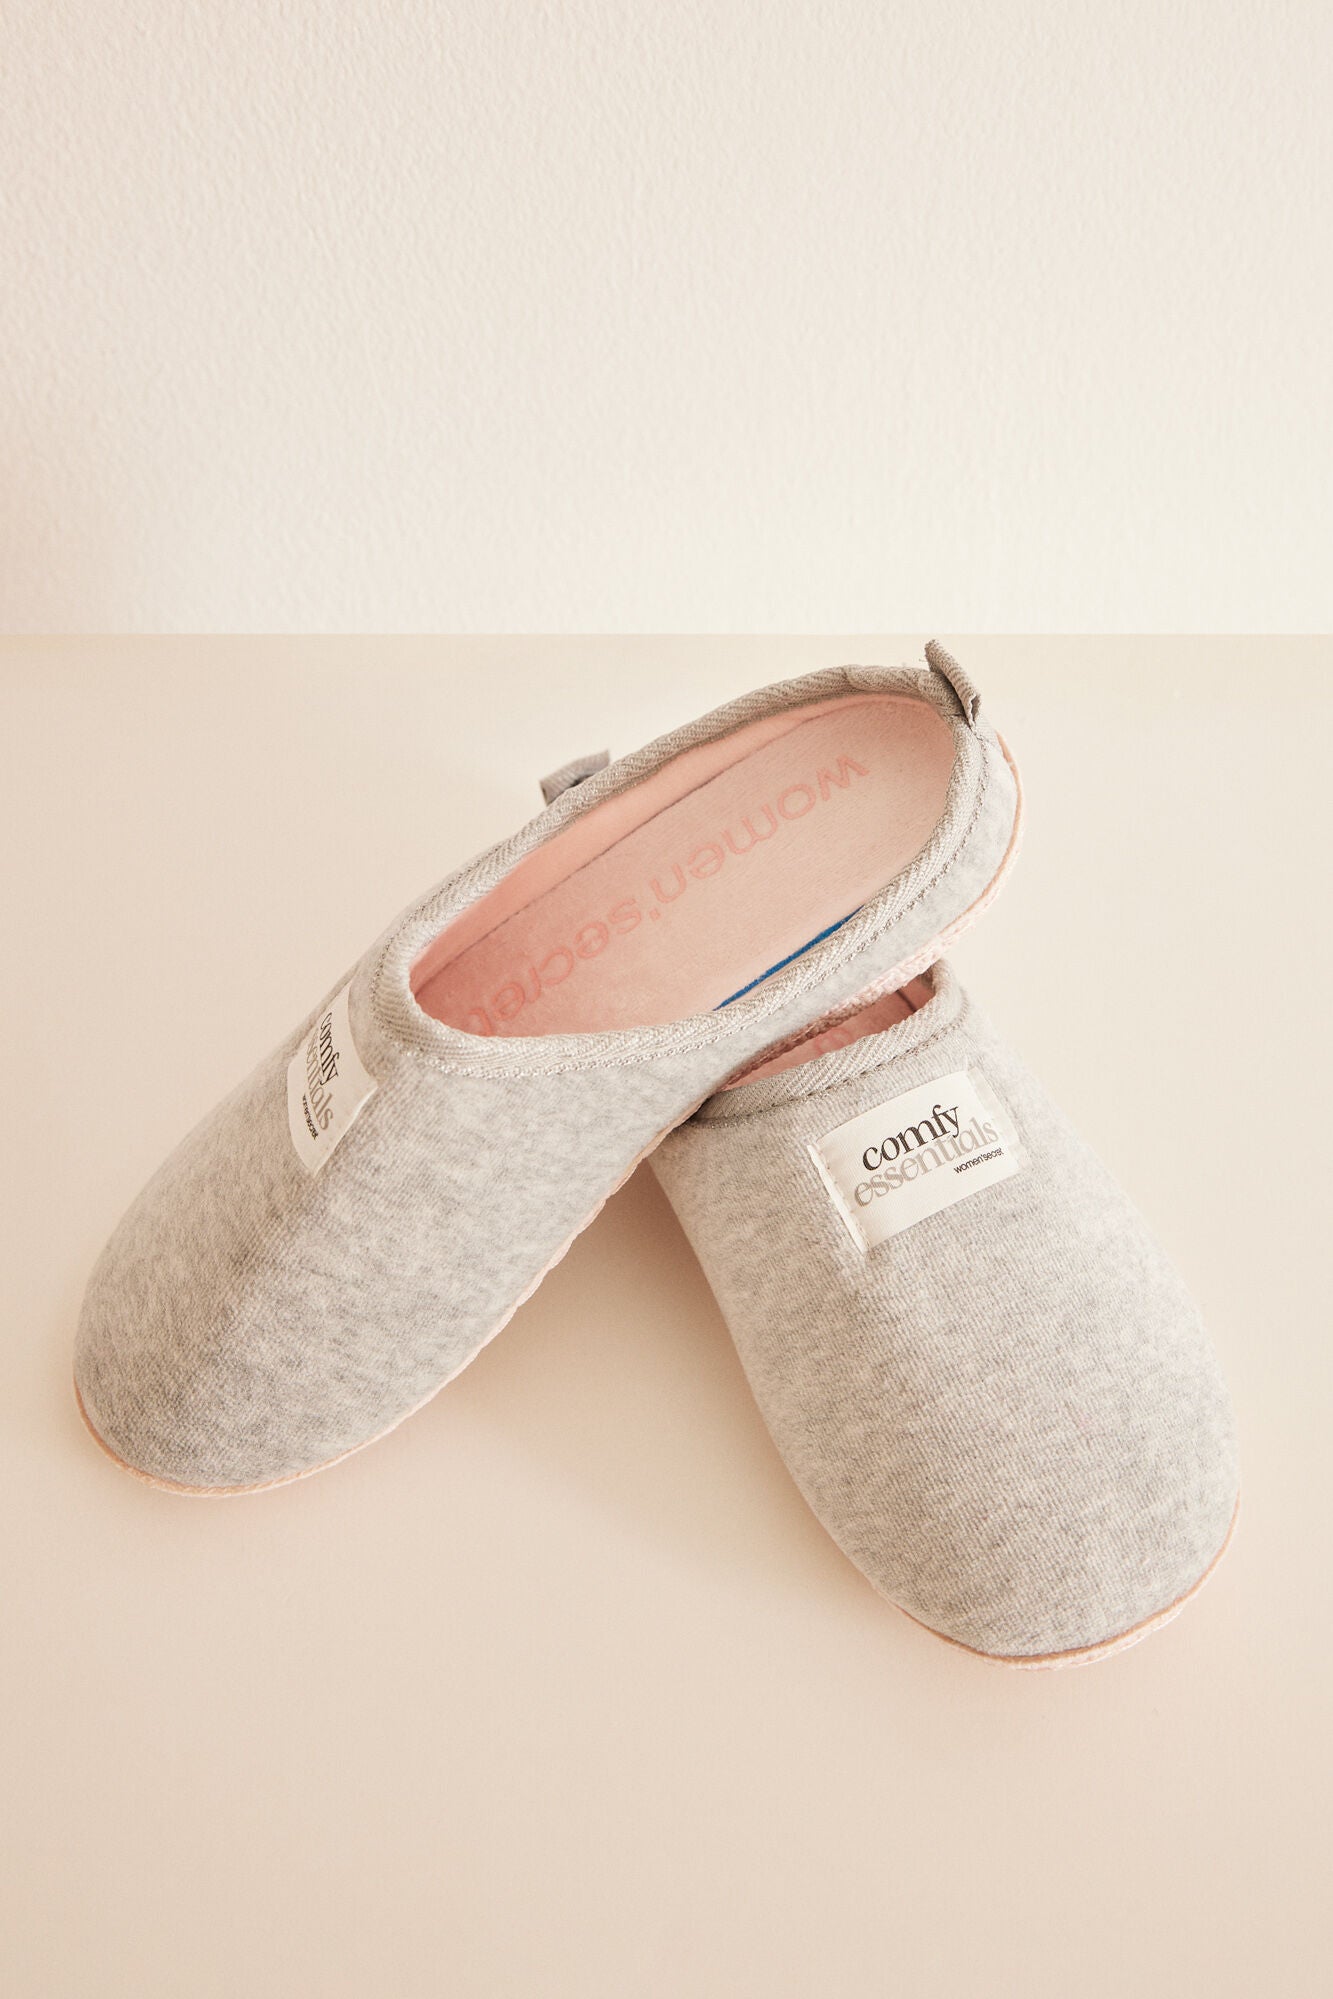 Slippers house removable grey insole